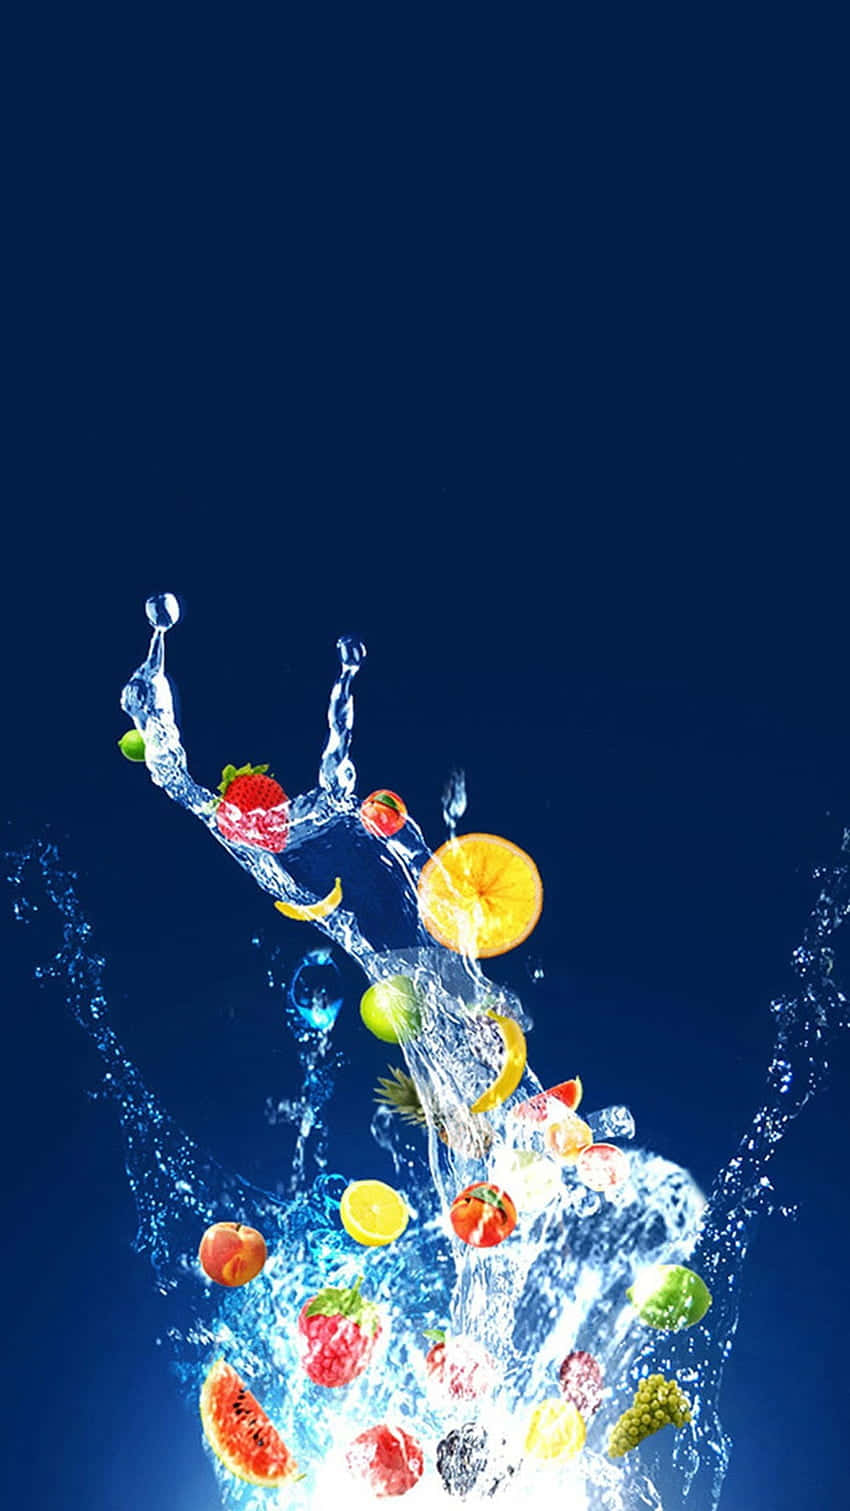 A Blue Background With Fruit Splashing Into The Water Wallpaper